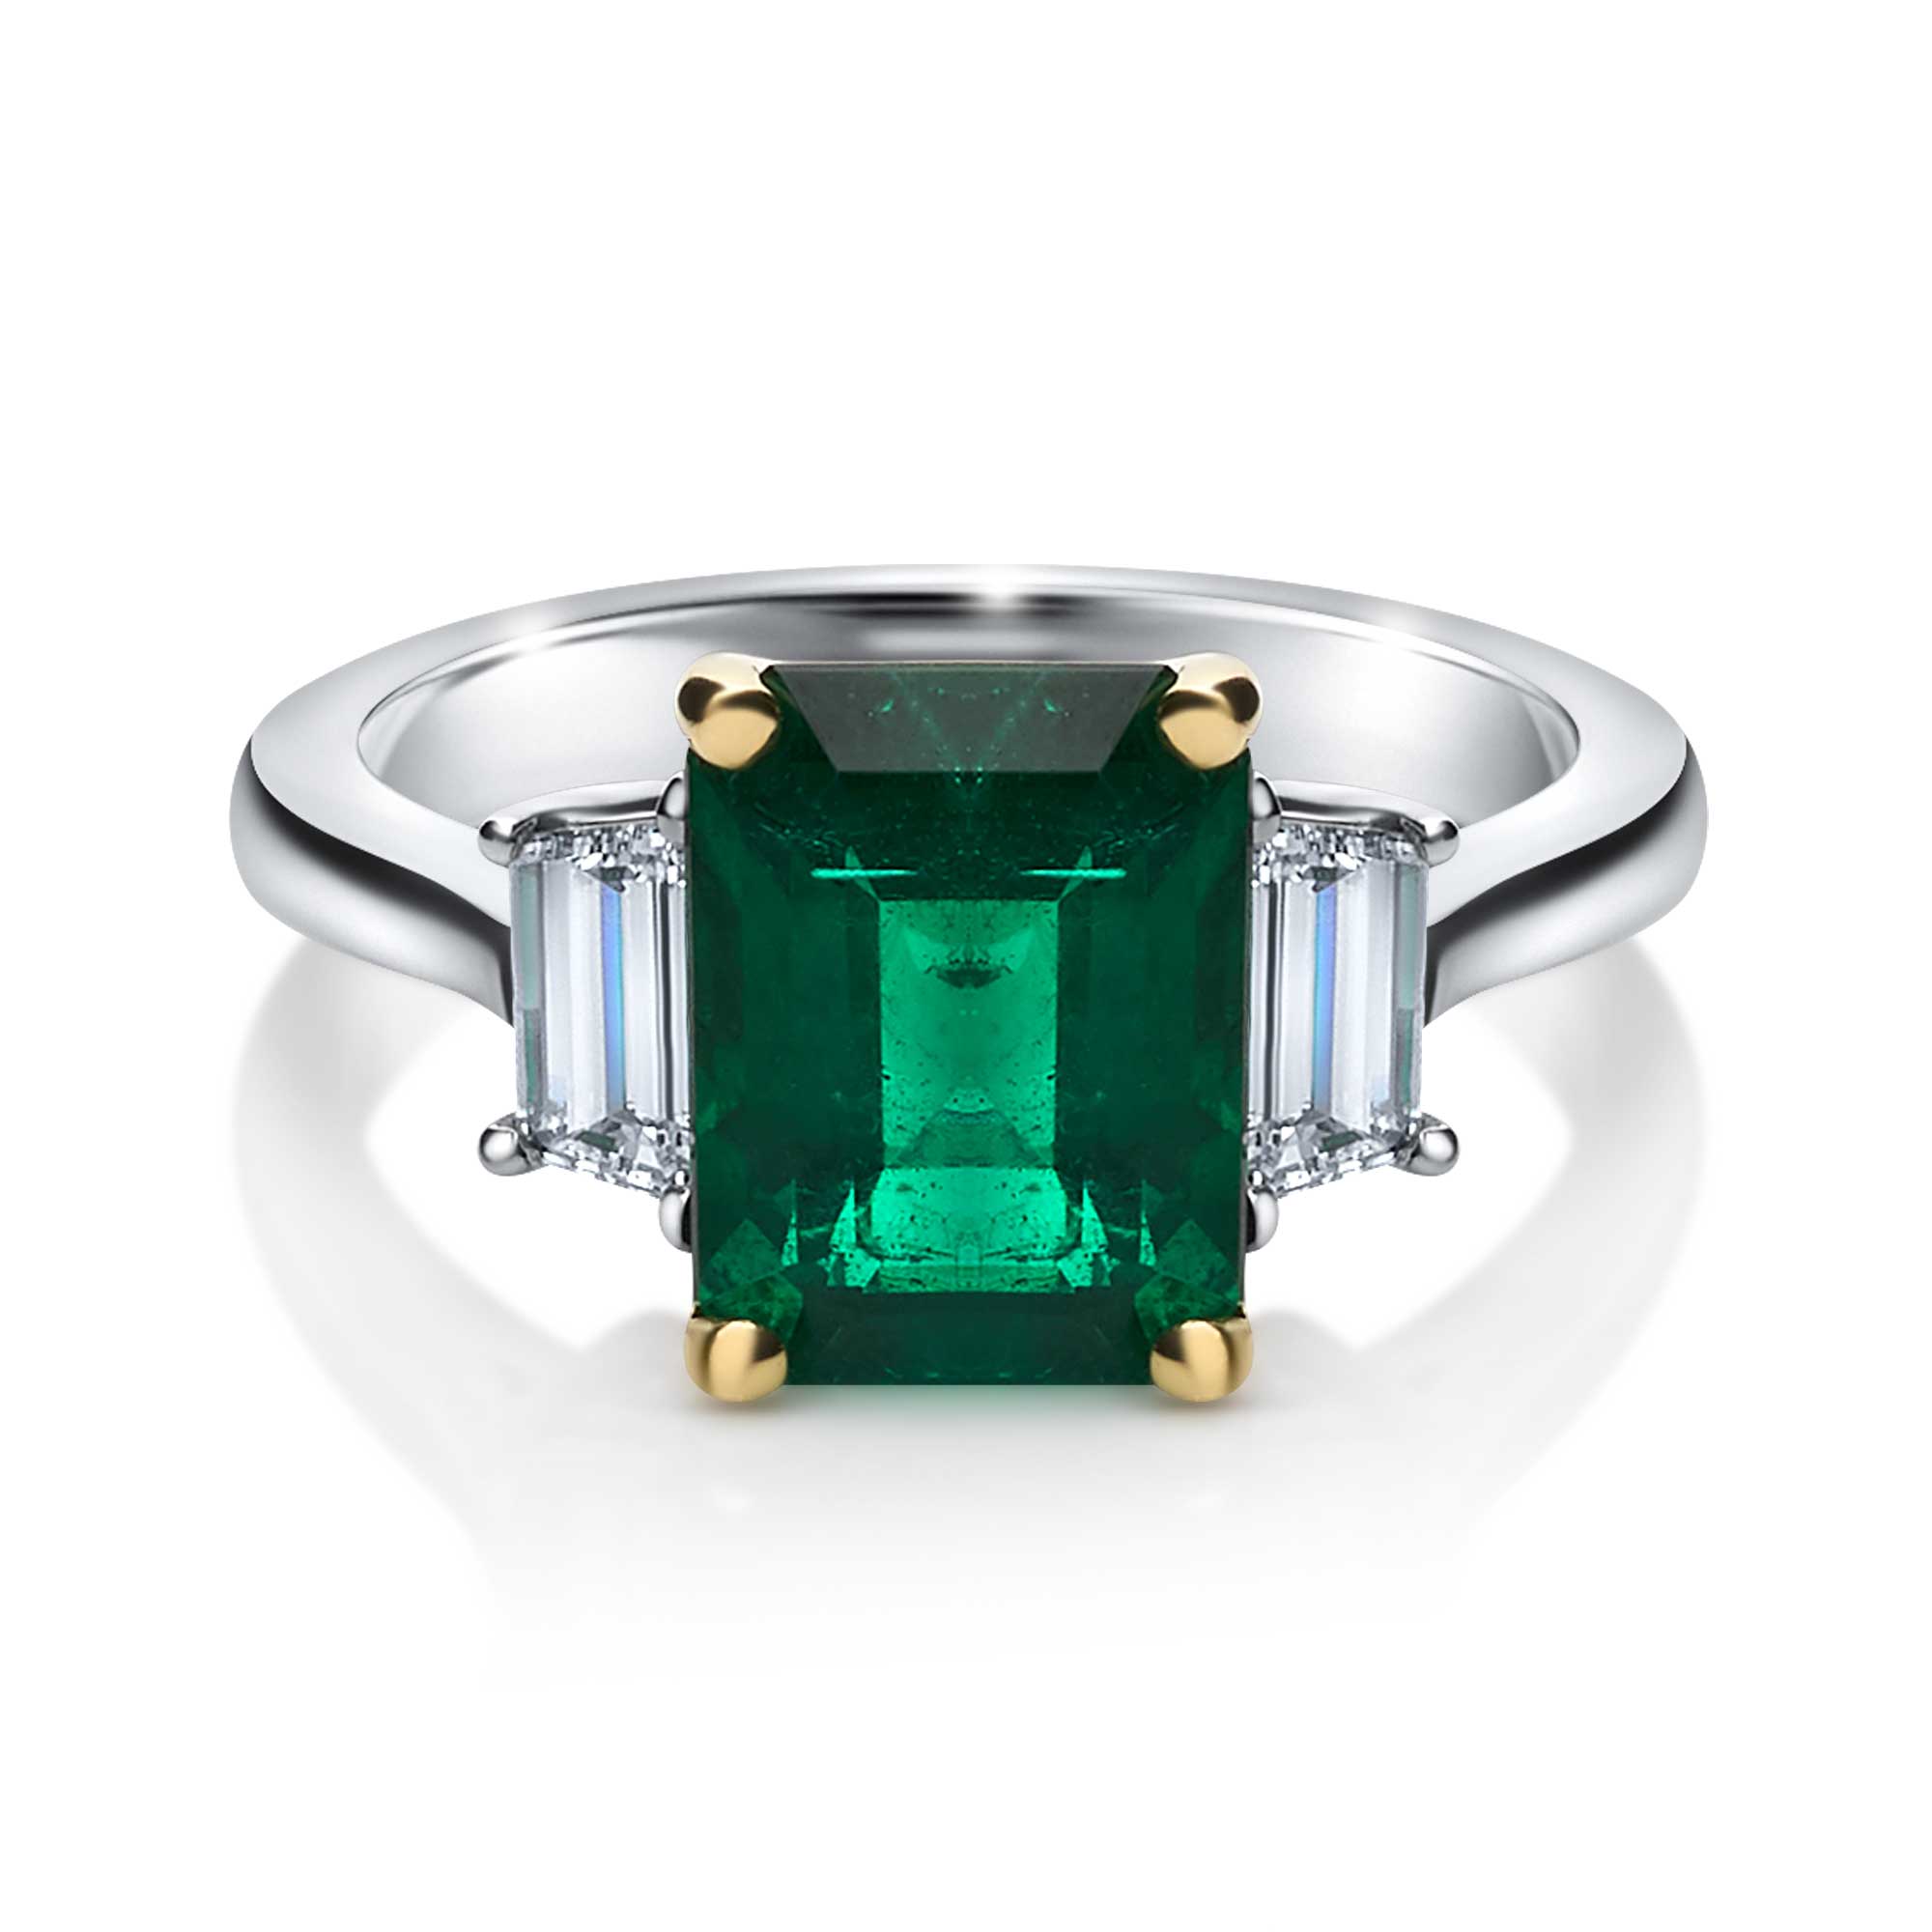 Emerald Ring - Precious Stones - Richards Gems and Jewelry